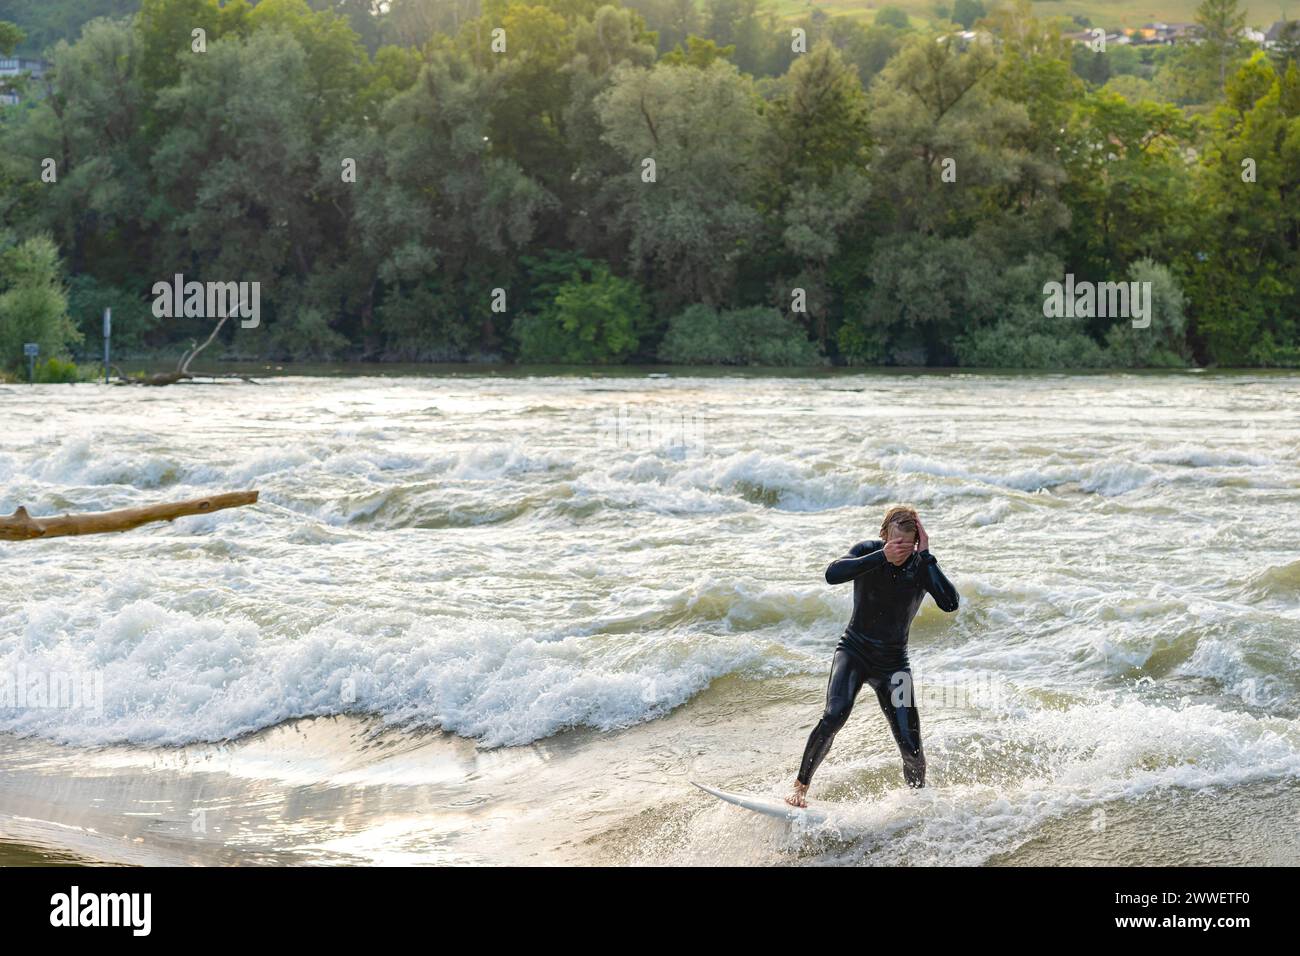 During the flood, a young surfer with neoprene wetsuit, is seen by the Aare river, wiping his face after braving the abundance of water. Stock Photo